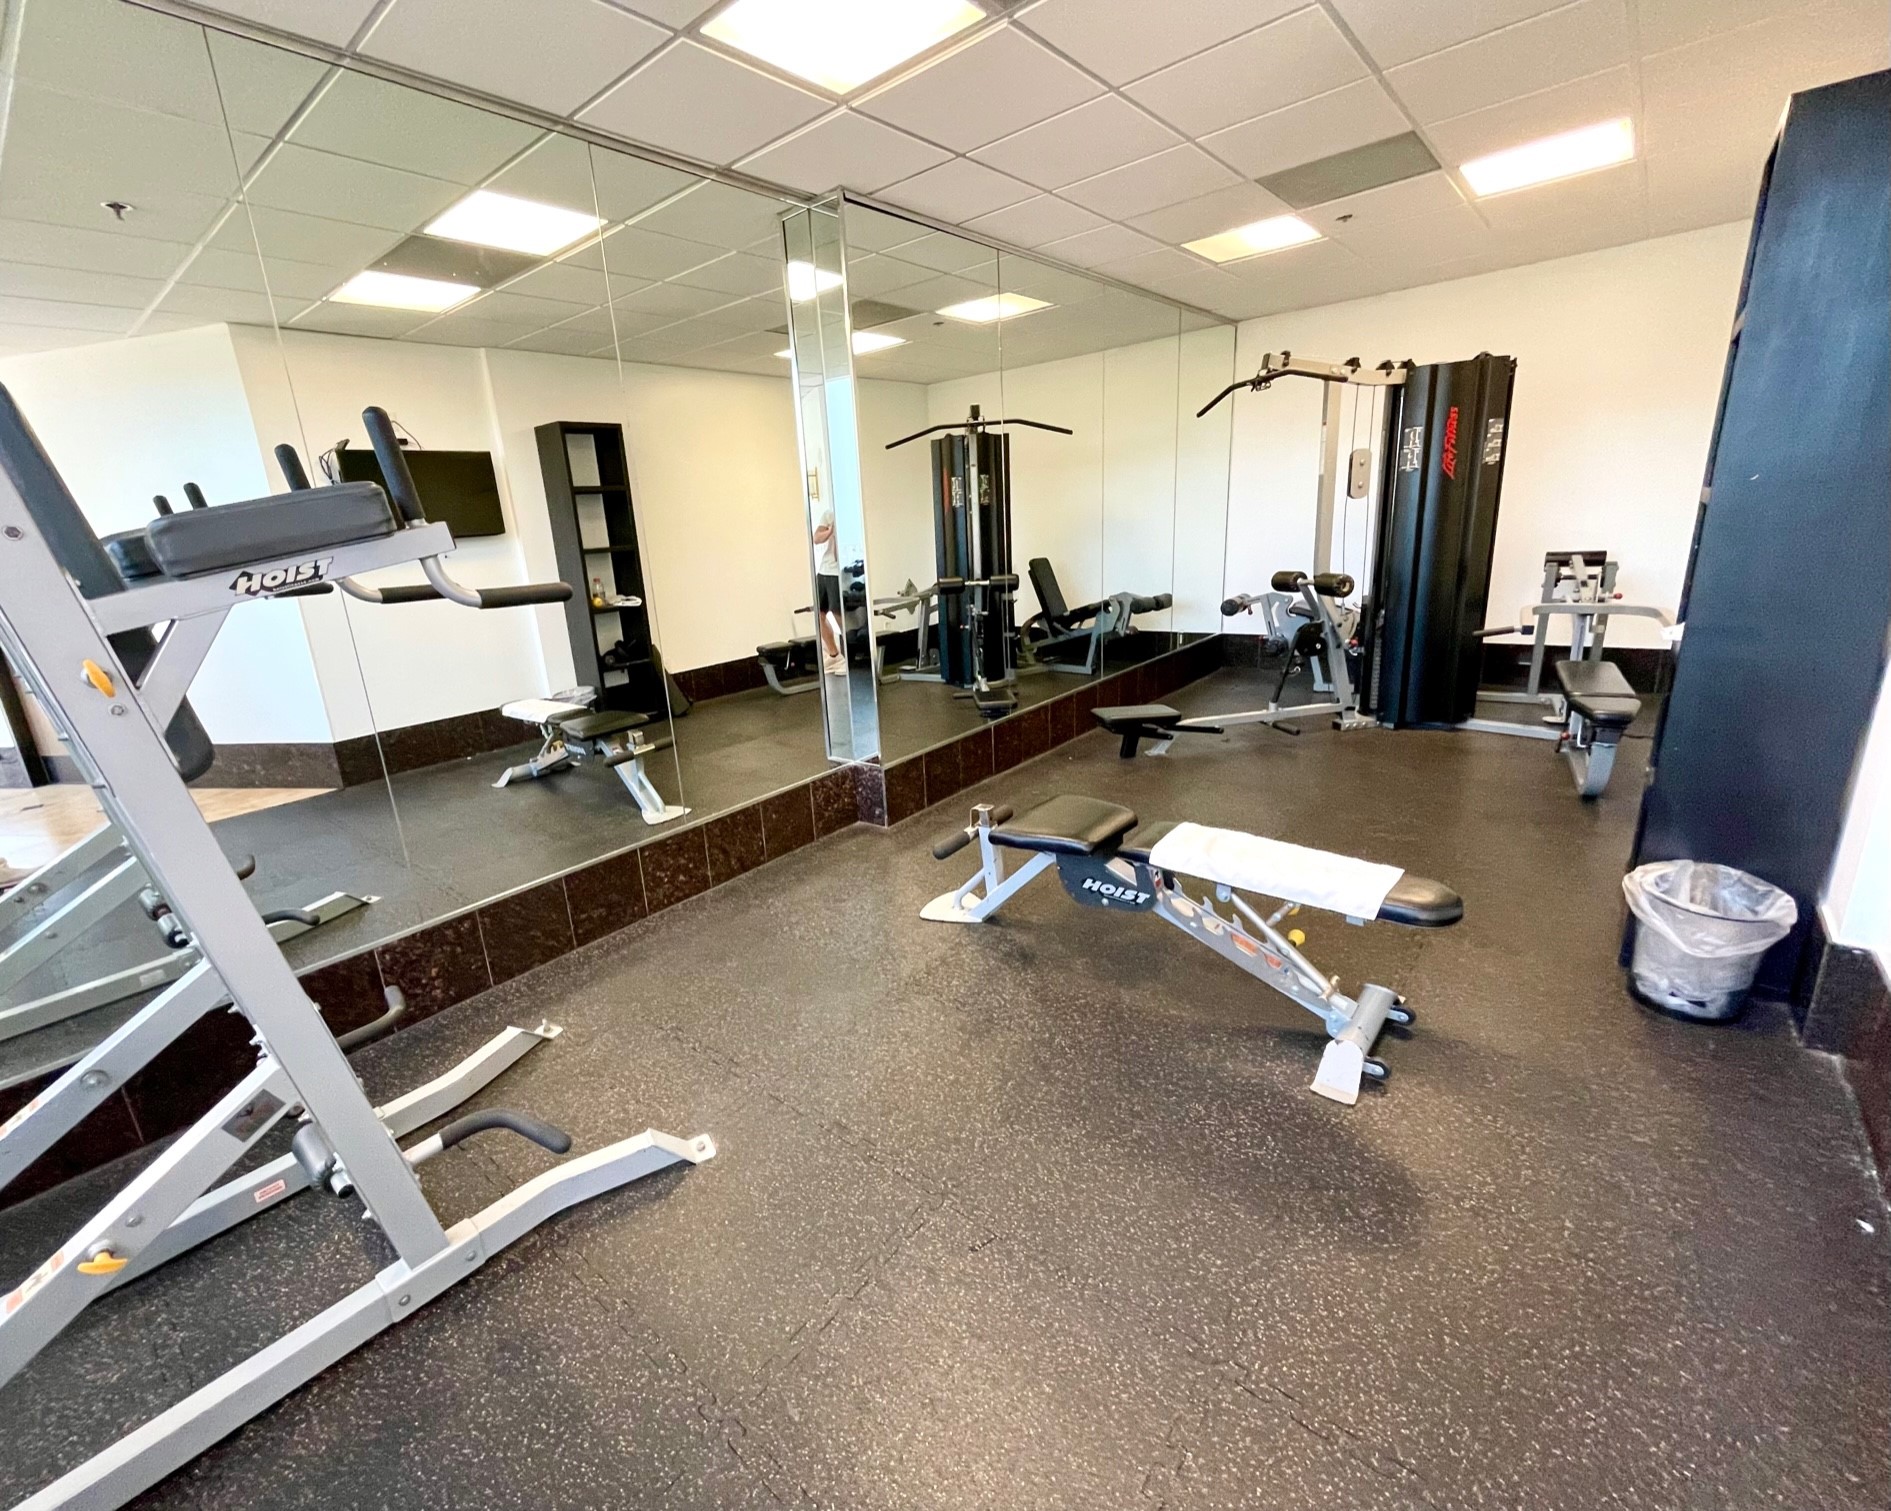 Your free weights training area complete with a bench and cable machine. - If you have additional questions regarding 3525 Sage Road  in Houston or would like to tour the property with us call 800-660-1022 and reference MLS# 79115123.